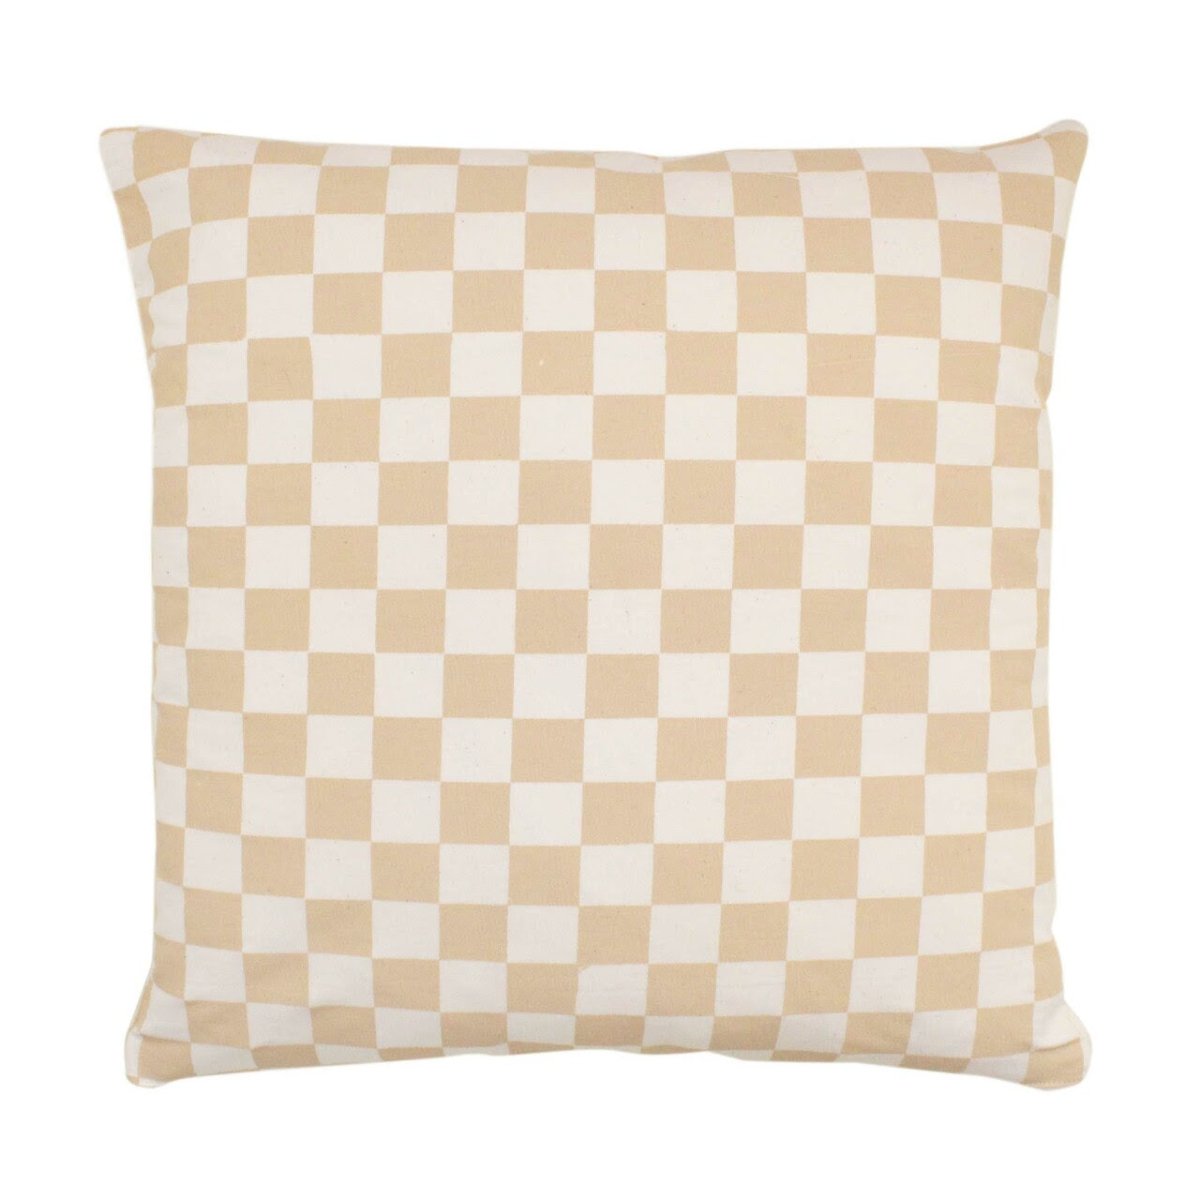 Imani Collective Checkered Pillow Cover - lily & onyx